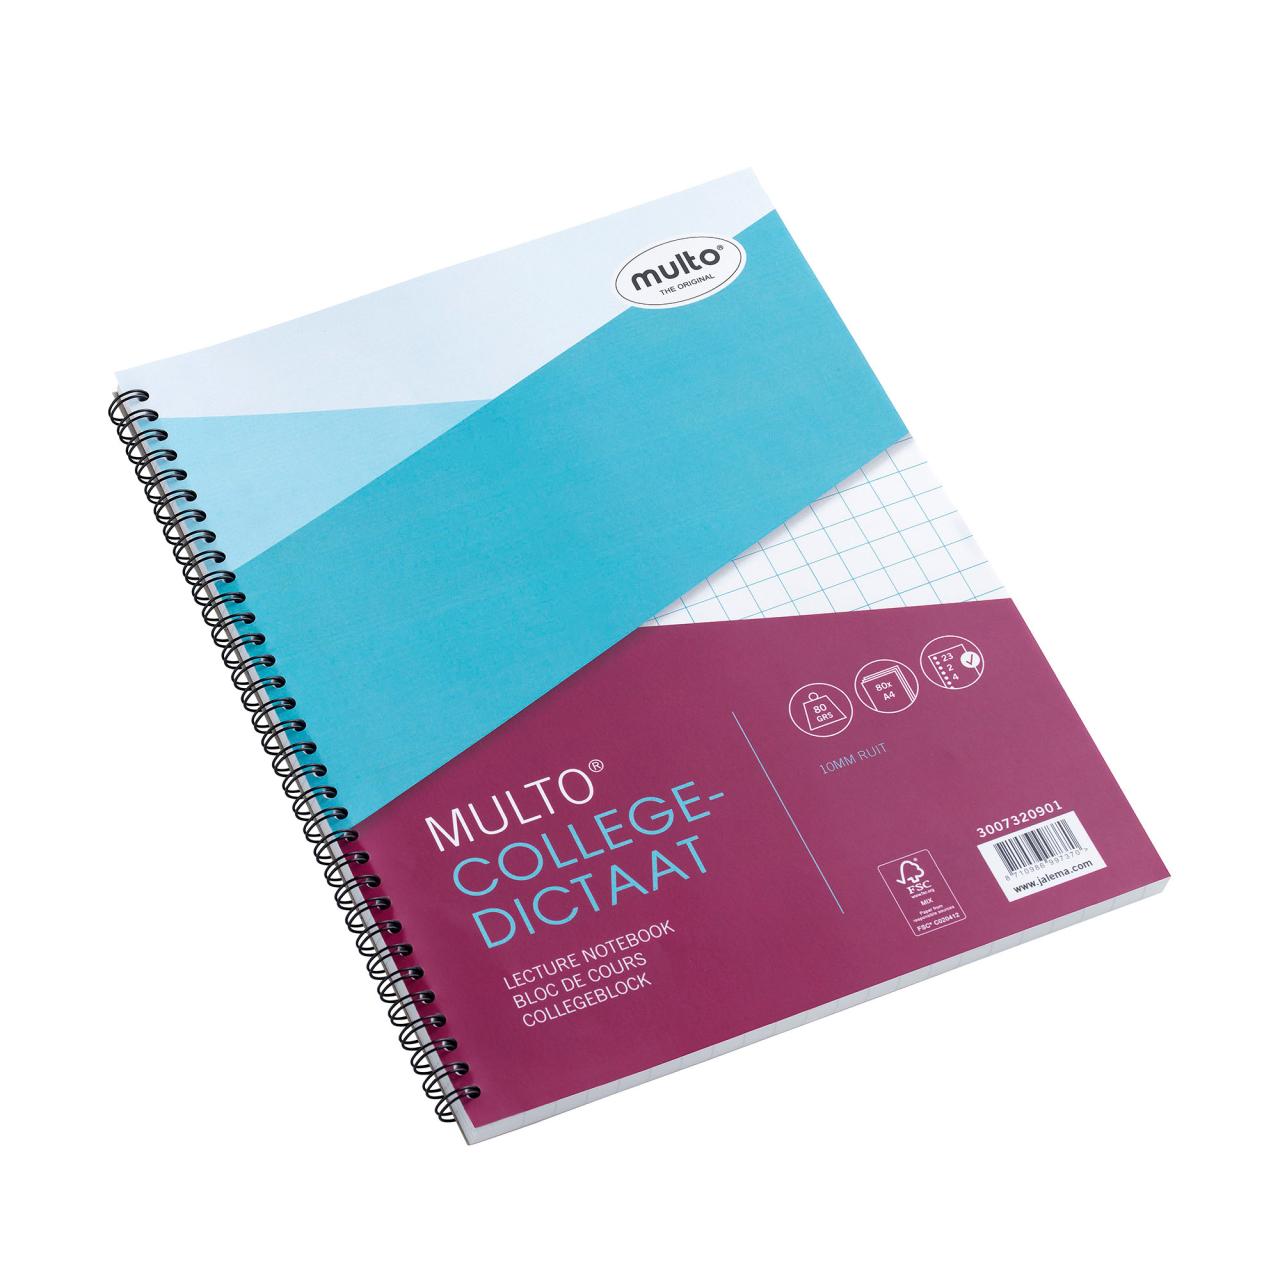 Multo Notebook, A4, Squared 10 mm, 23 rings